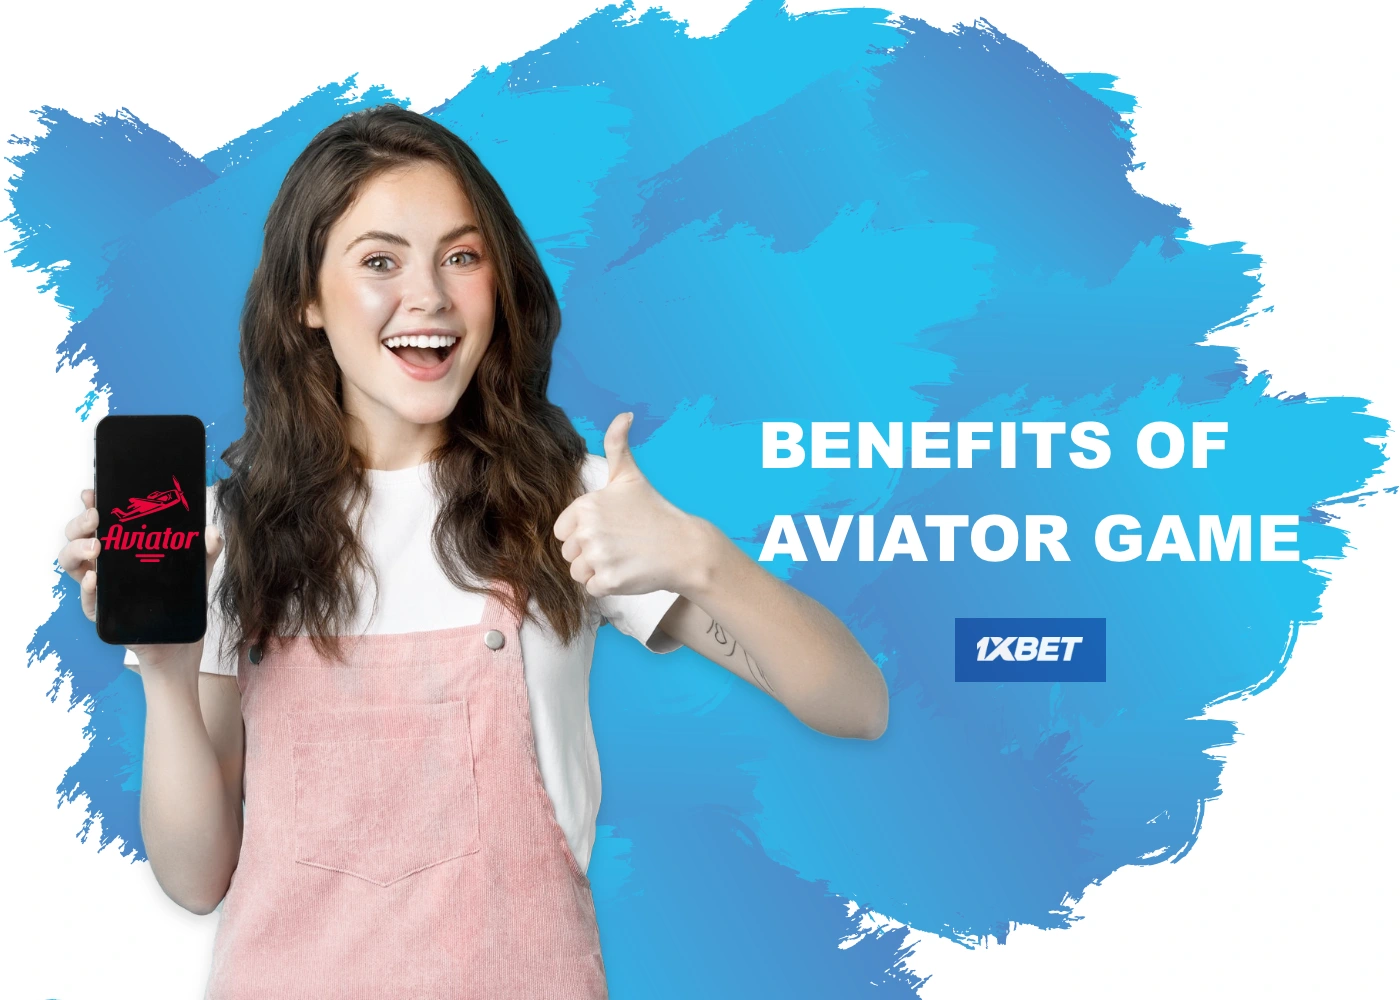 The main benefits of Aviator 1xBet game for newbie